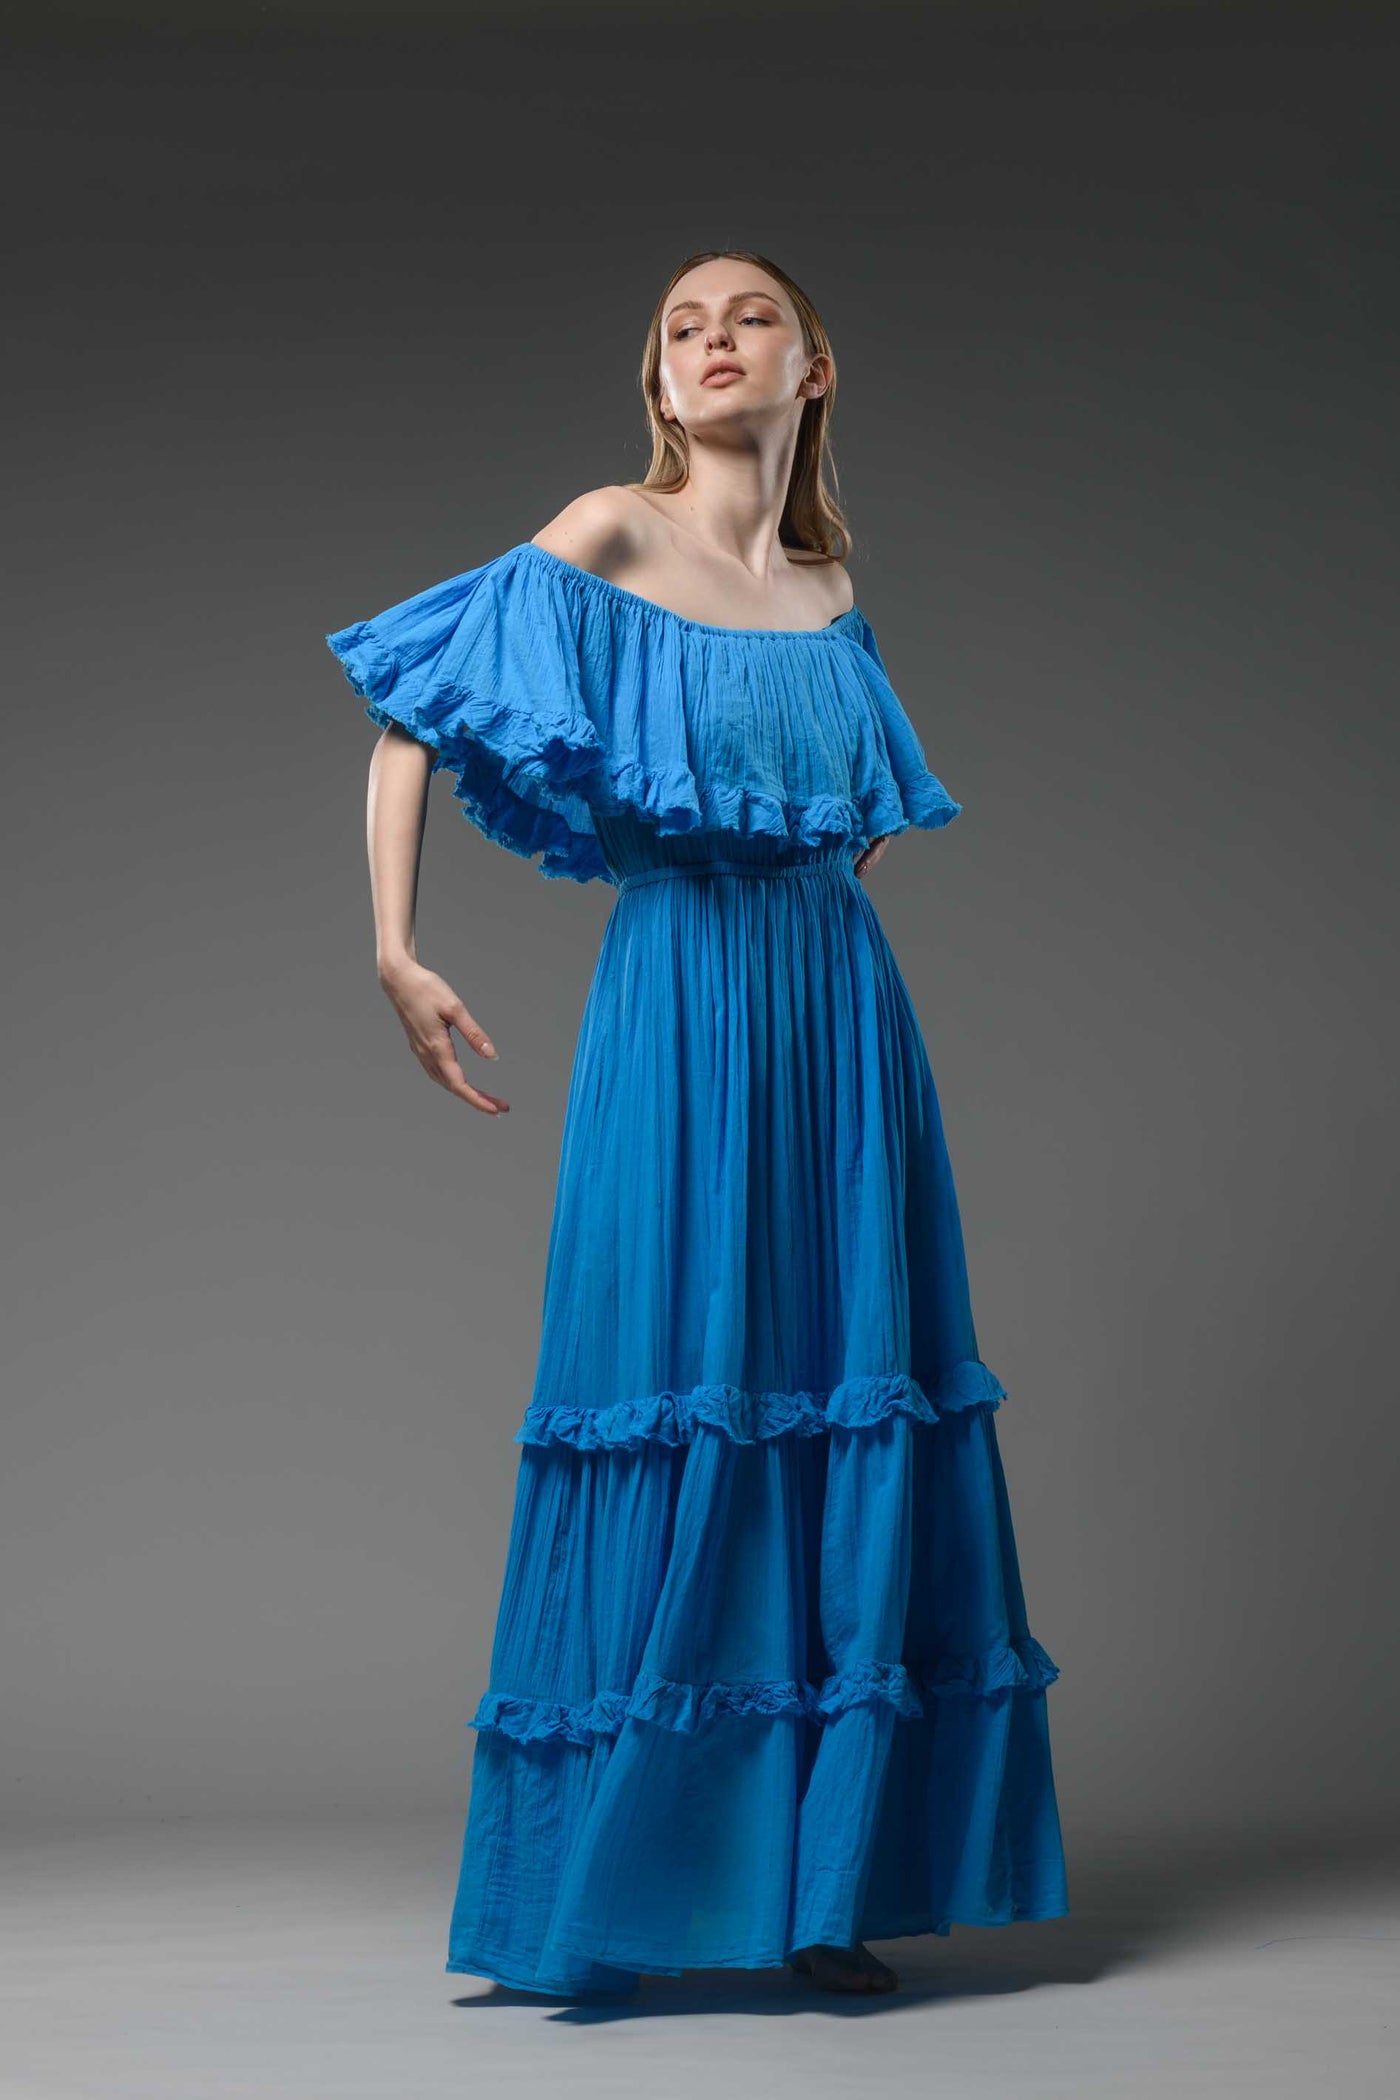 Hippie elegant double layer off the shoulder turquoise maxi dress